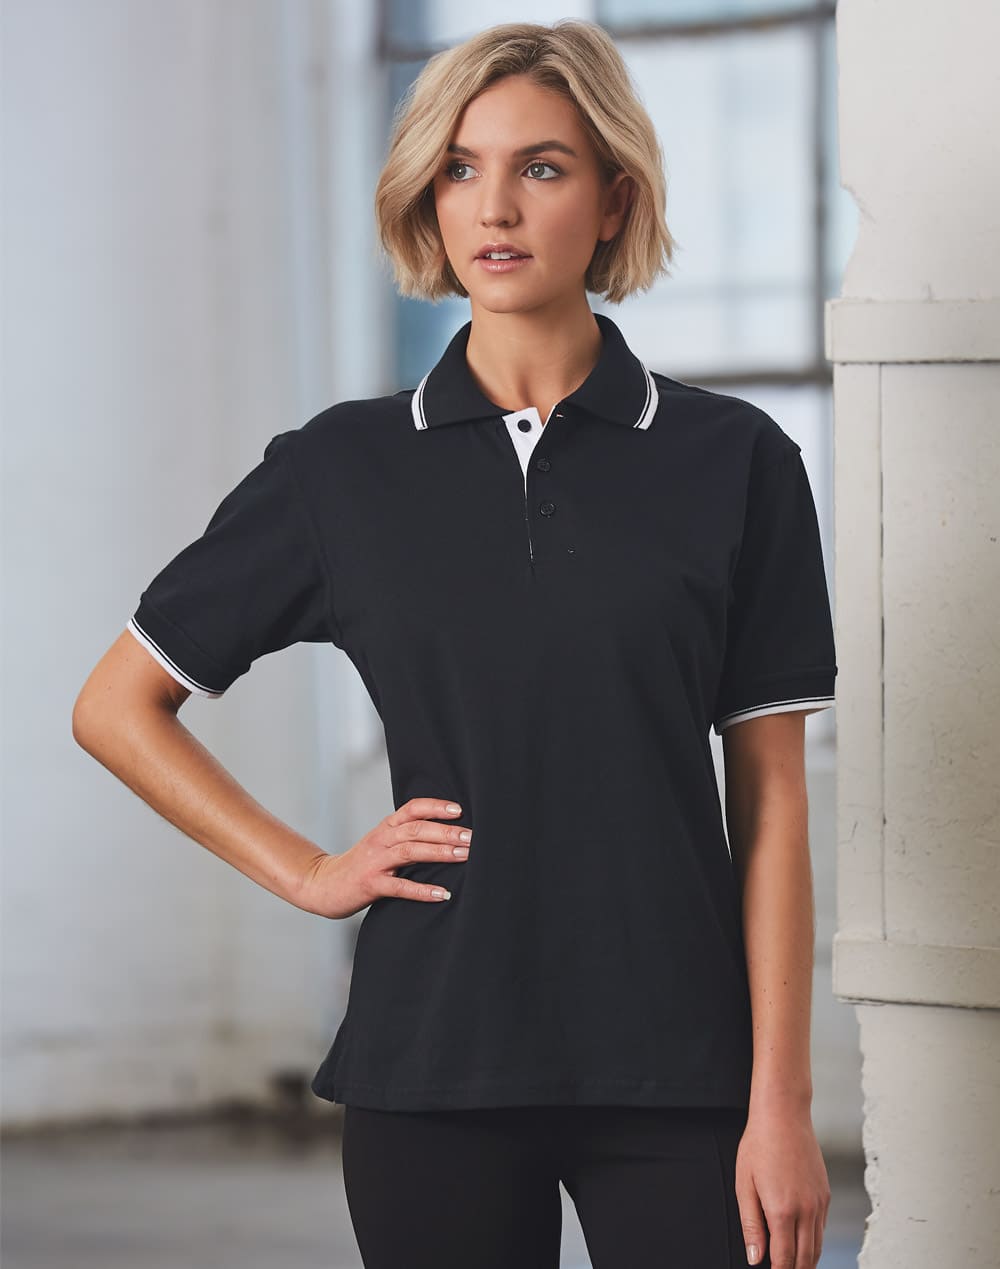 Custom Made Macquarie Unisex Cotton Kit Polos Online in Perth